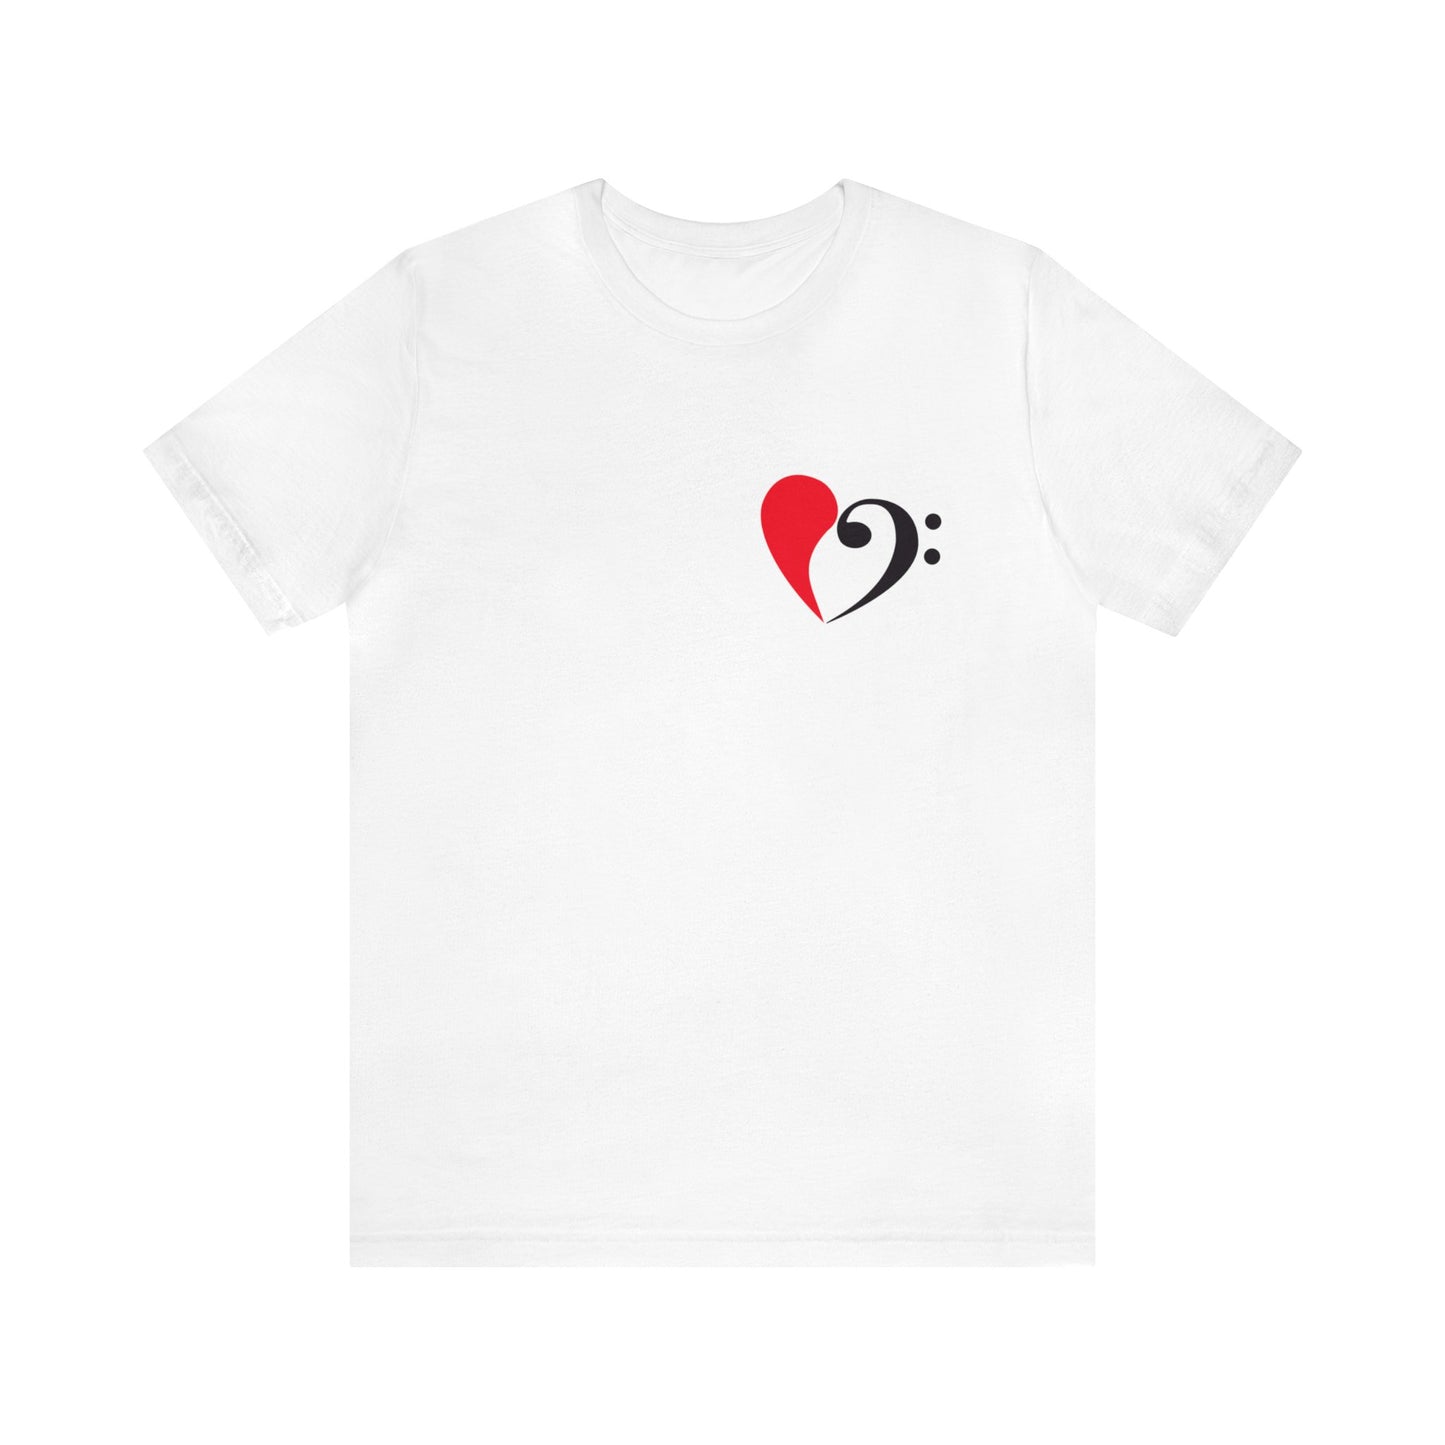 Bass Love T-shirt, EXPRESS Shipping in the USA, Unisex Bella+Canvas 3001 Tee, Gift for Bass players, Heart with Bass Clef